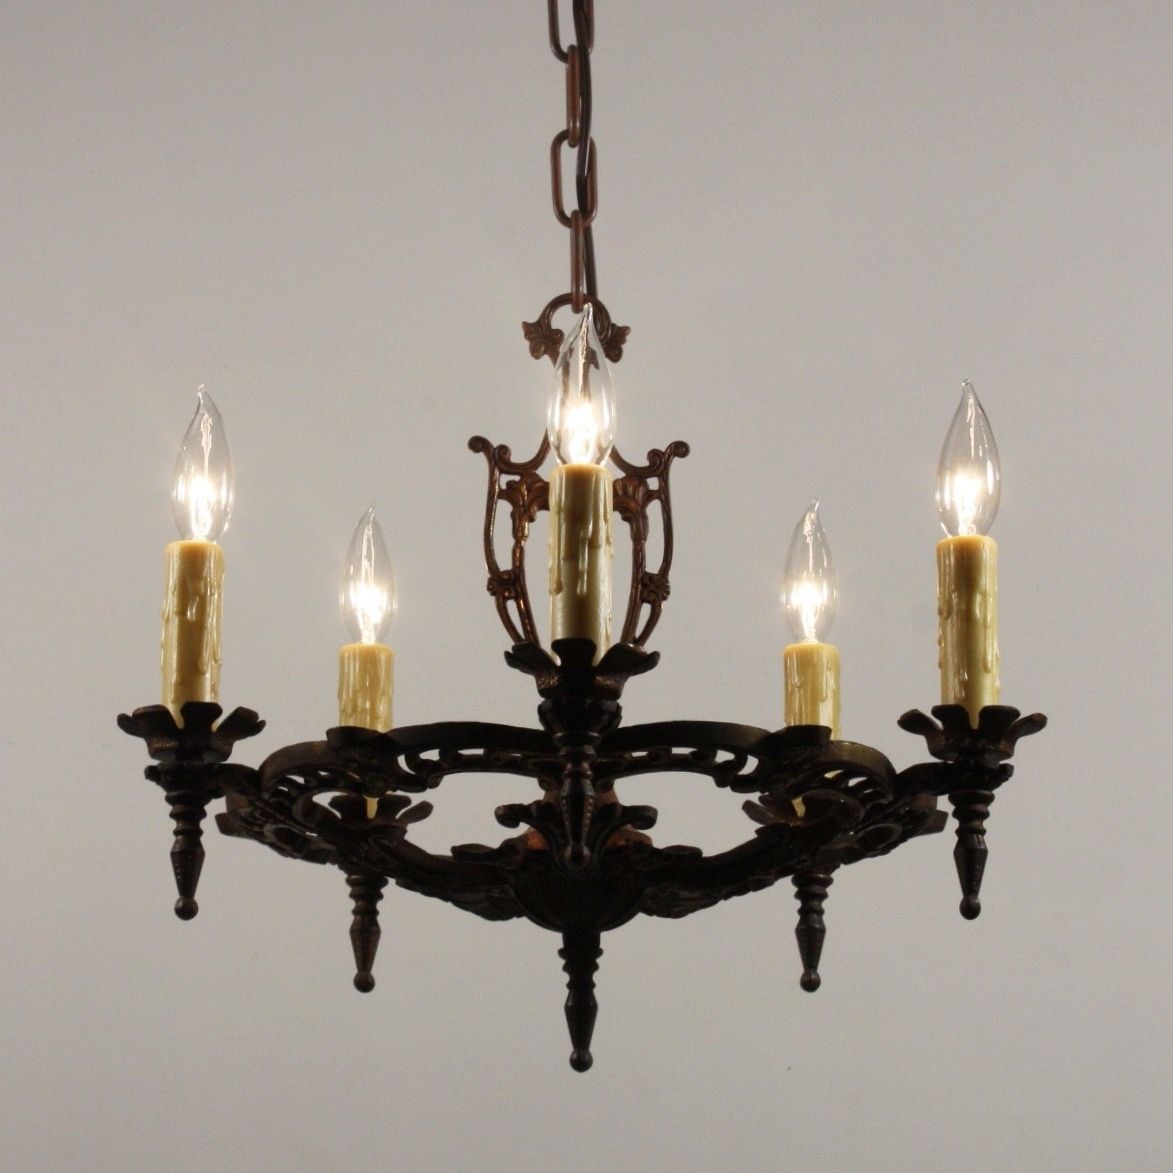 Antique Chandelier In Cast Iron, Antique Lighting – Preservation Intended For Current Cast Iron Antique Chandelier (View 11 of 20)